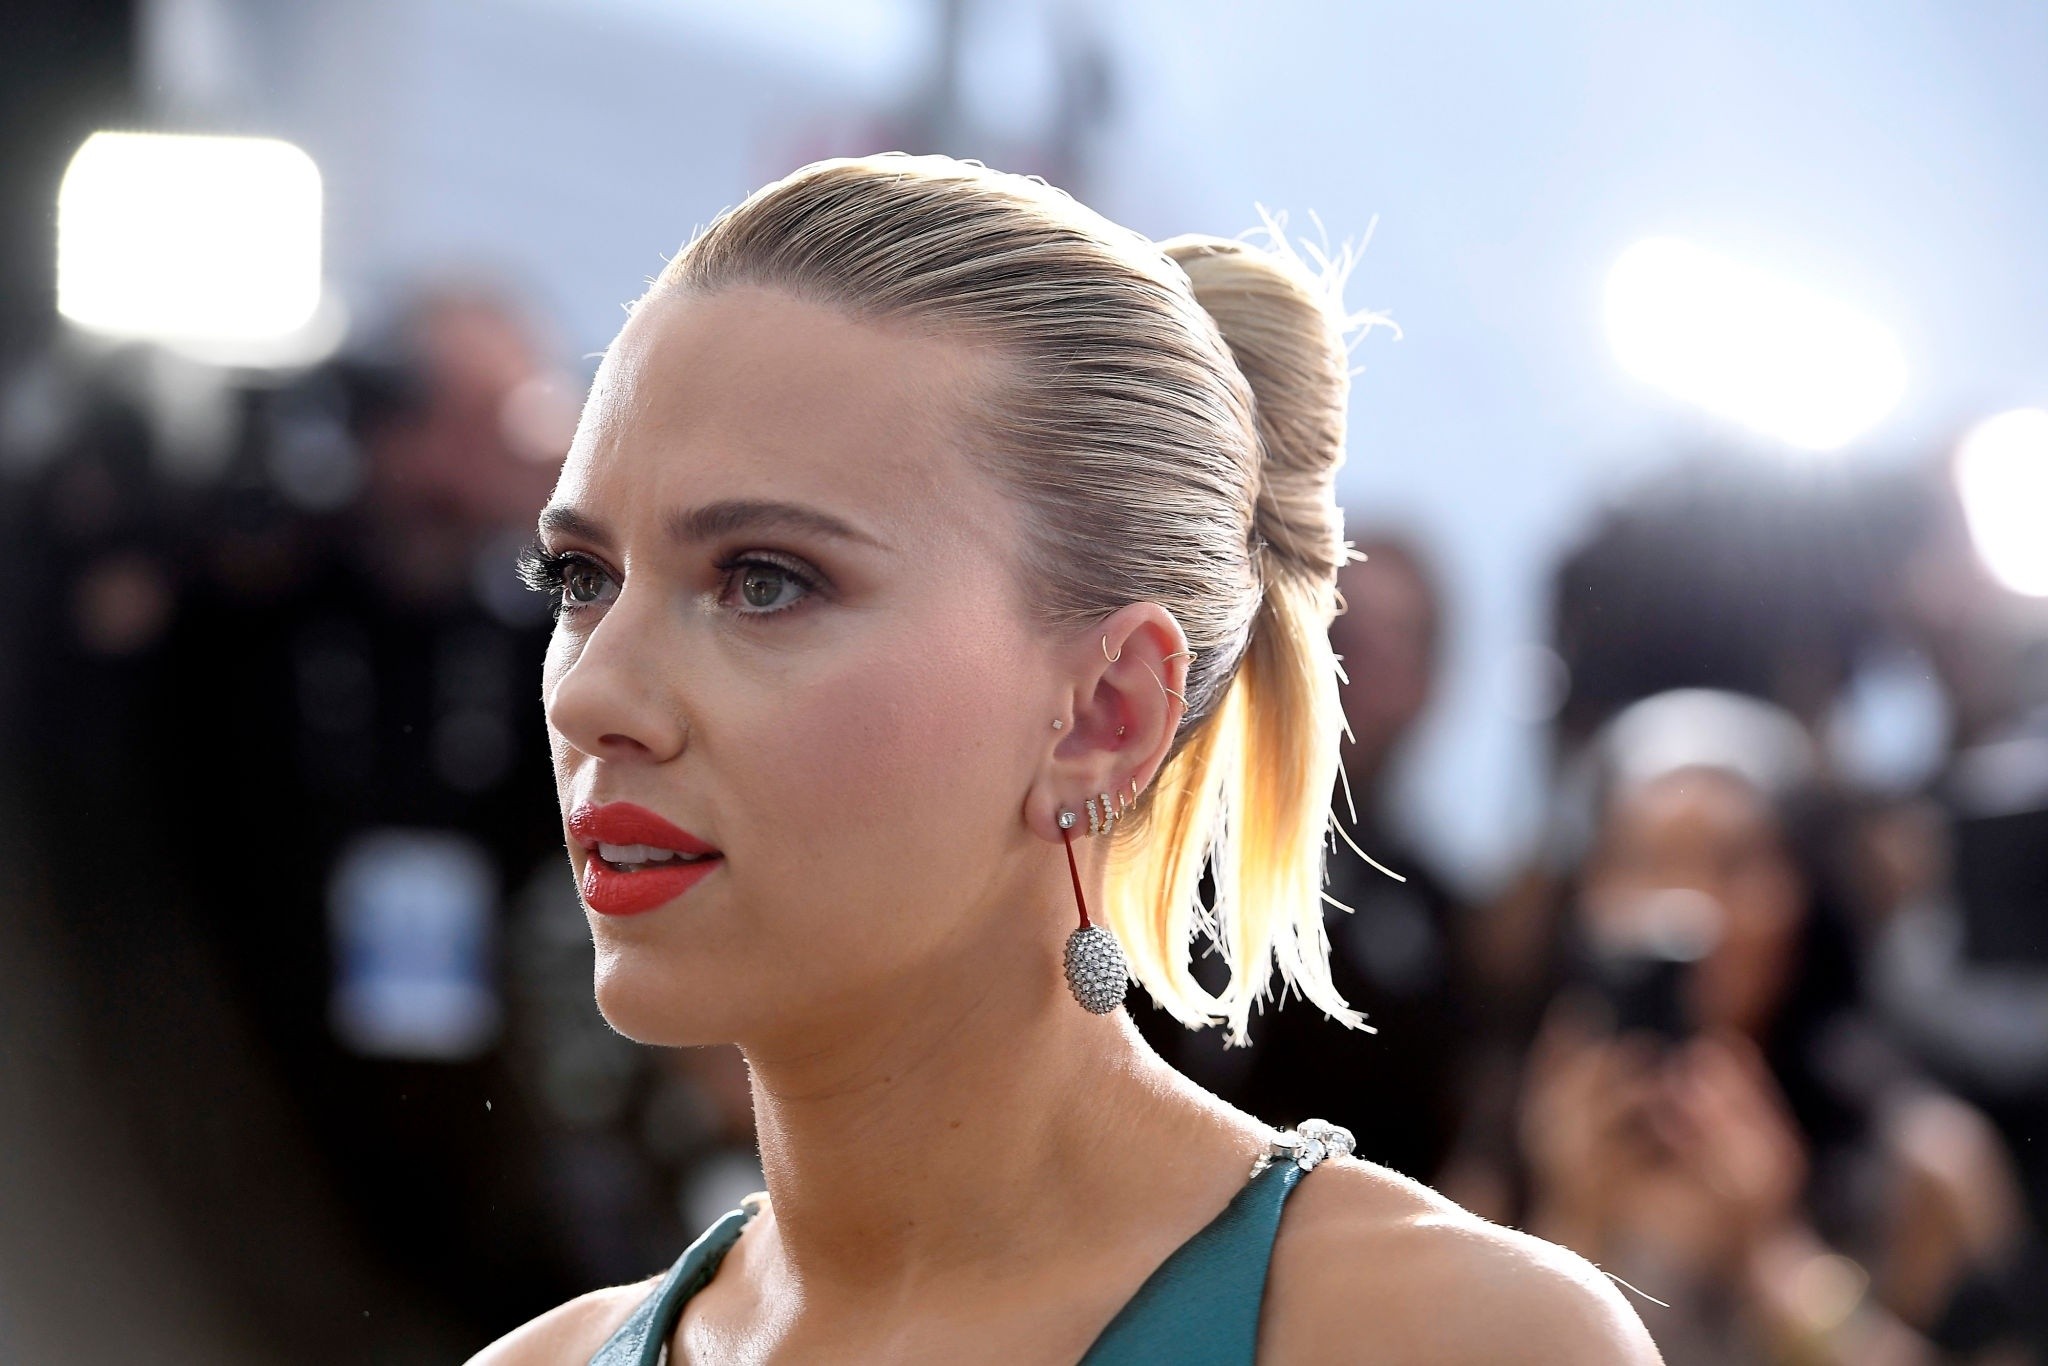 Scarlett Johansson Cleavage The Fappening Pro 70 - Scarlett Johansson Deep Cleavage (116 Photos)